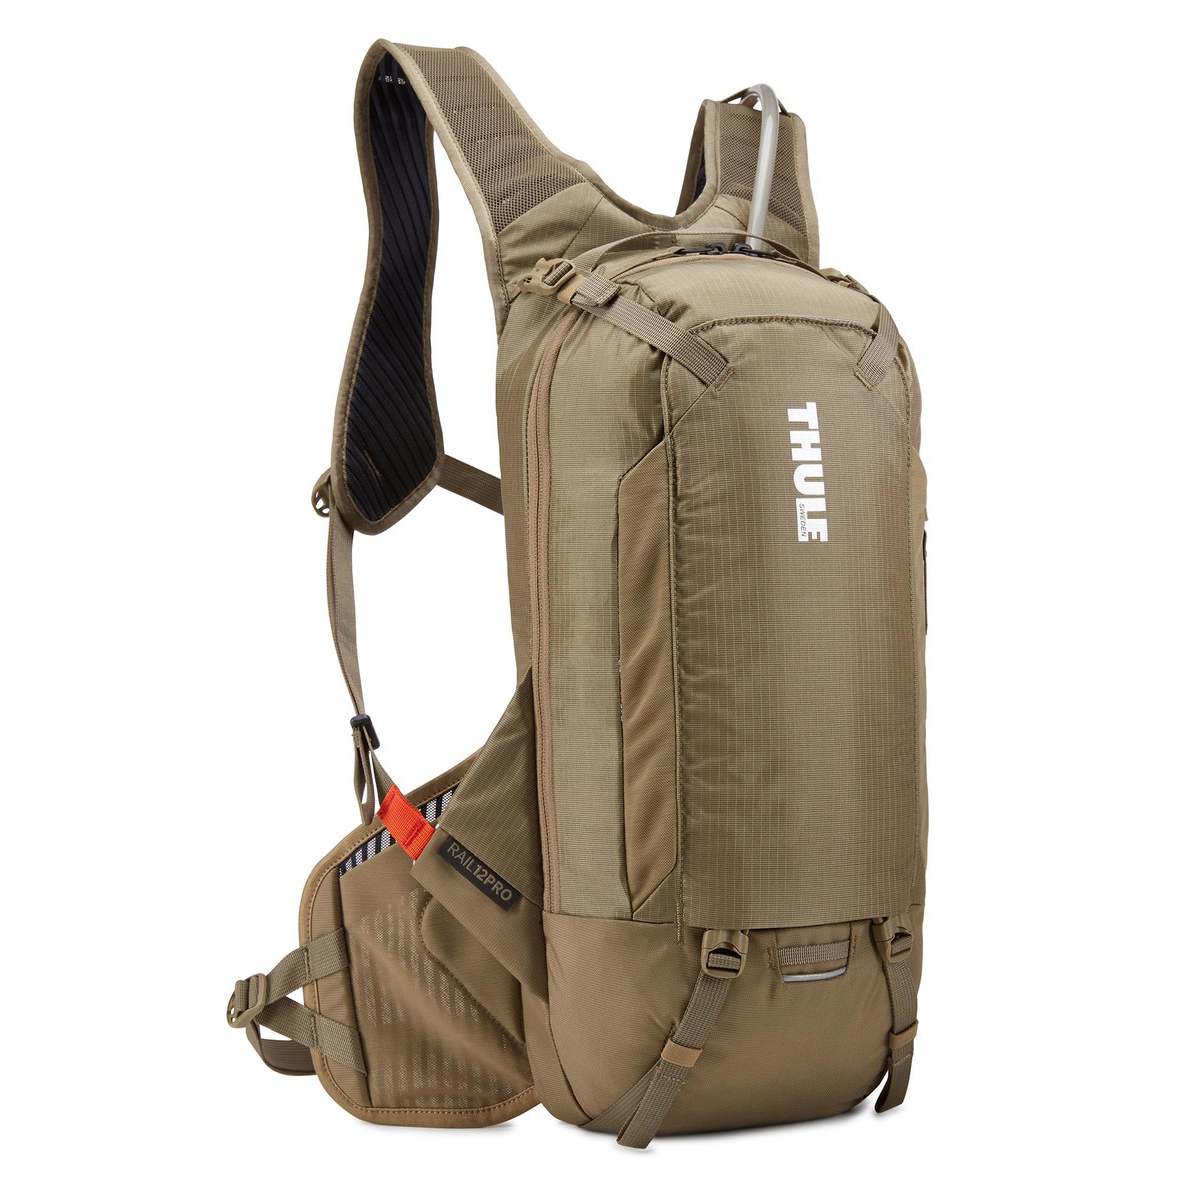 Water backpack 12lt PRO brown with back protector